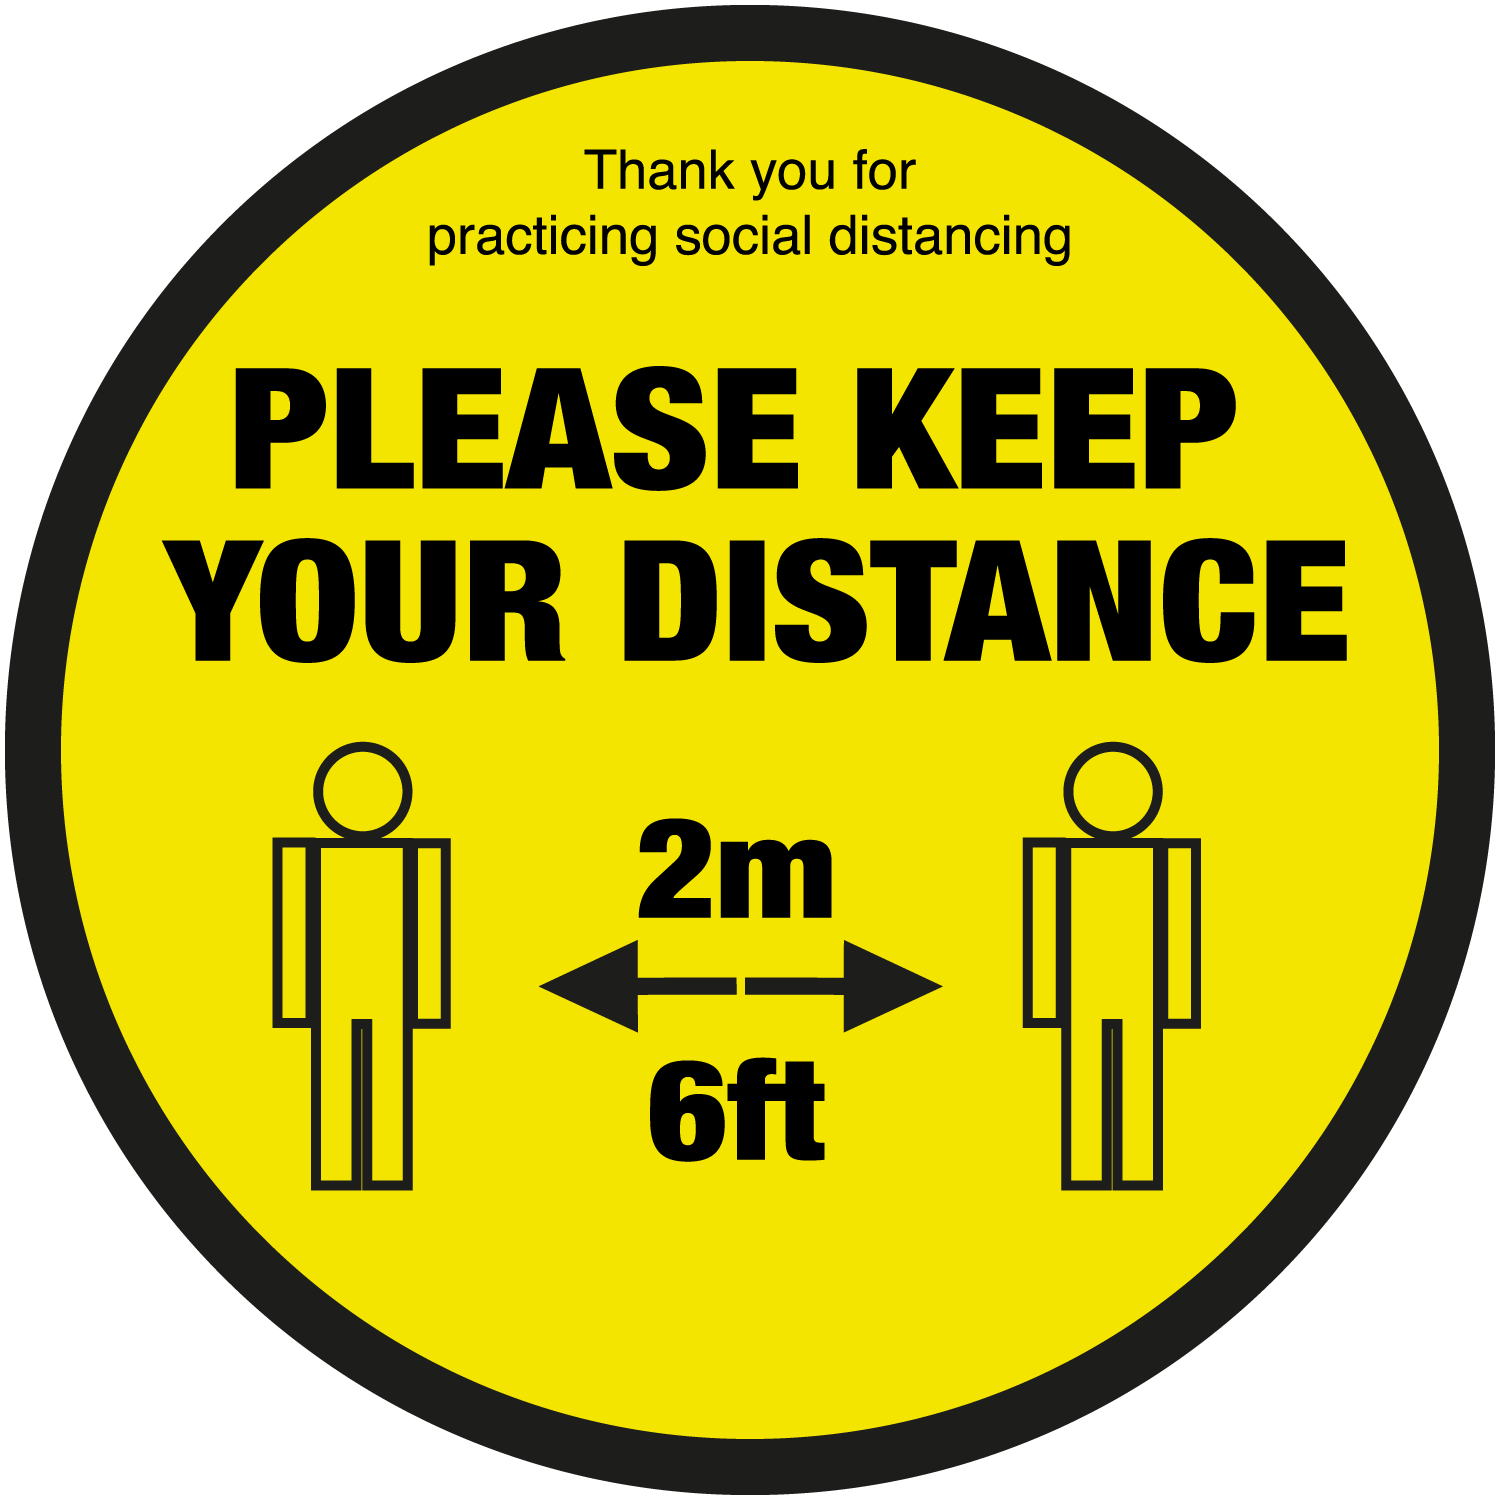 Please keep your distance text & symbol floor sign